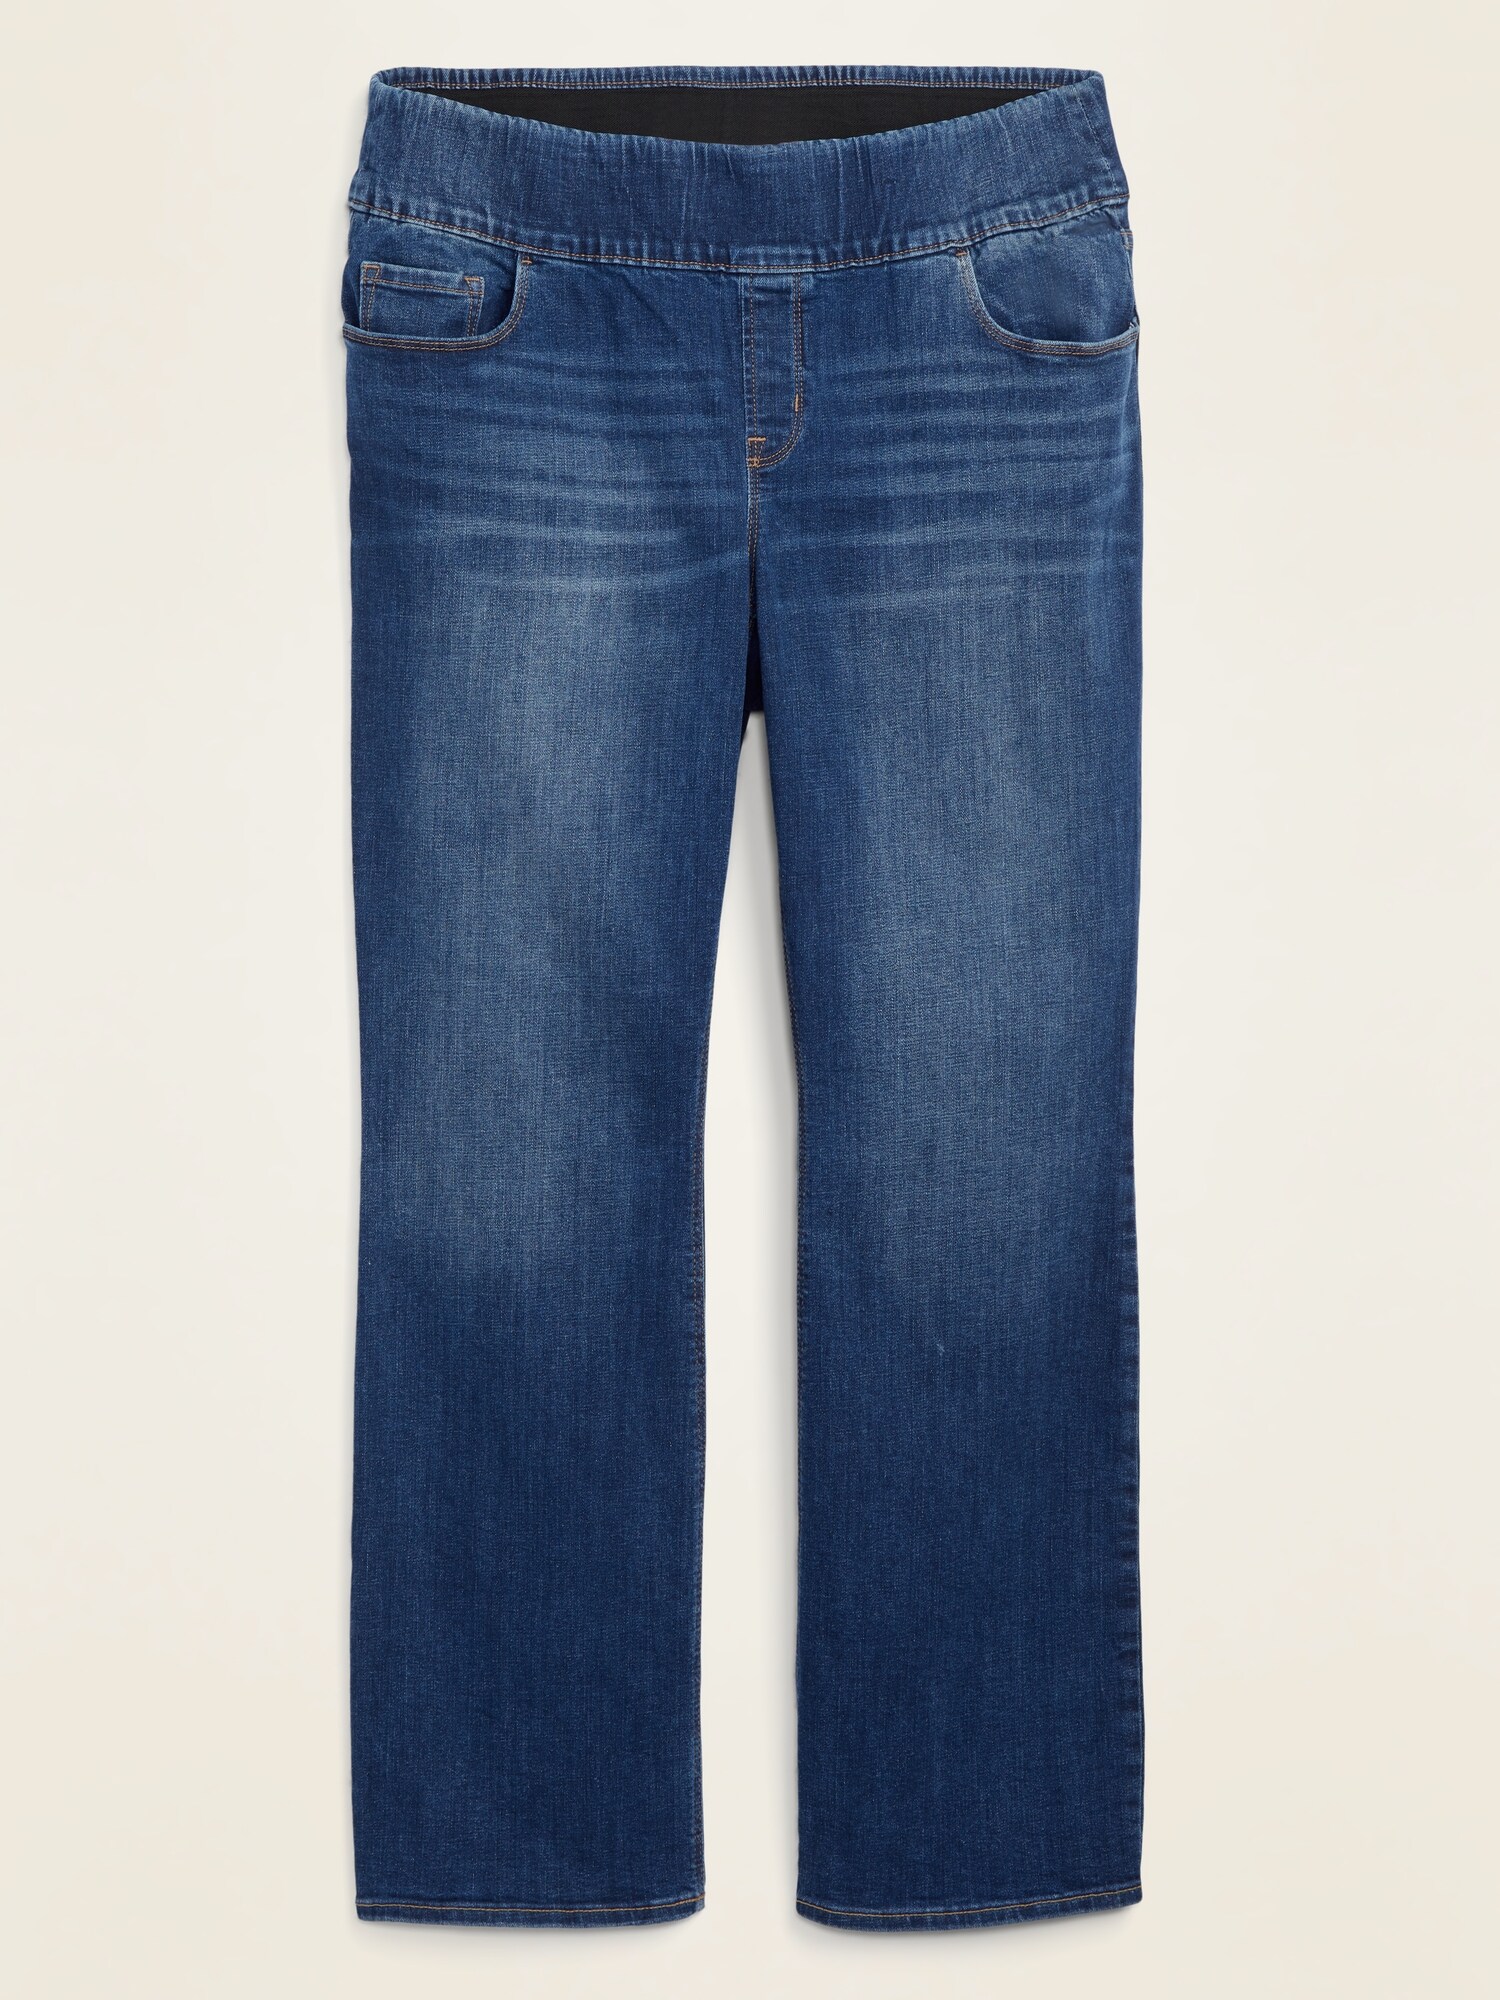 High-Waisted Kicker Boot-Cut Jeans For Women, Old Navy